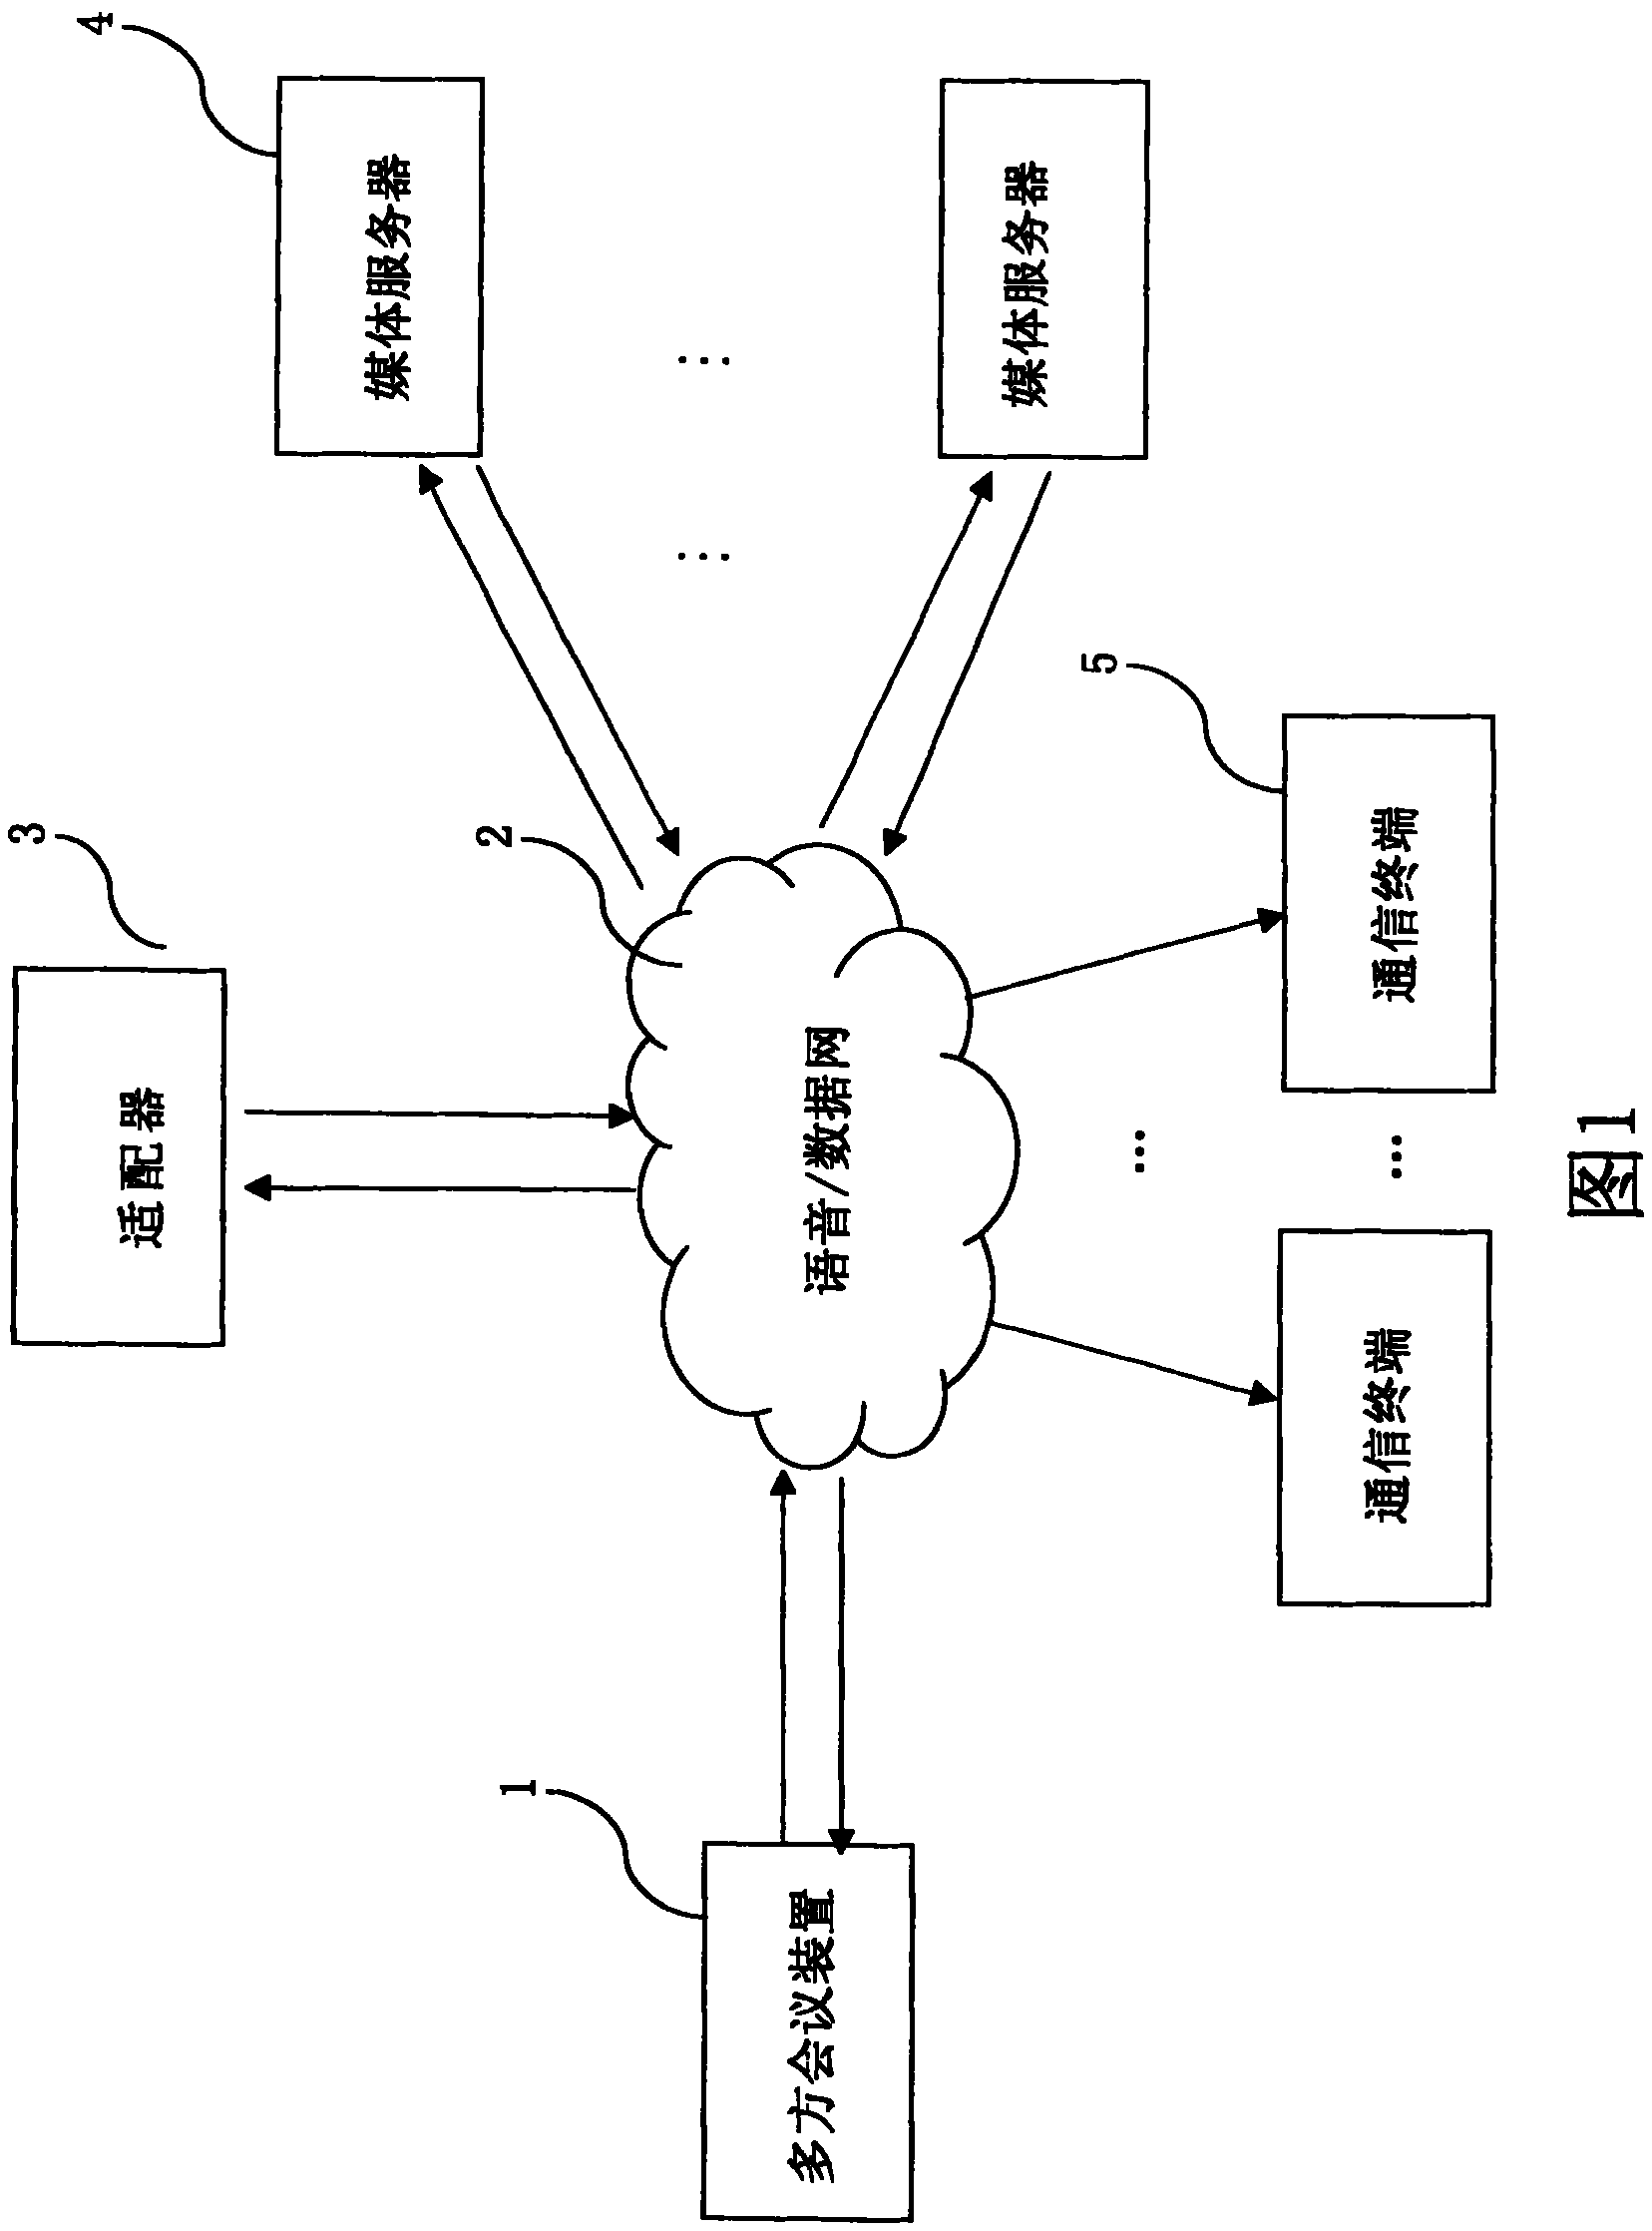 A multi-party conference device and multi-party conference system and method